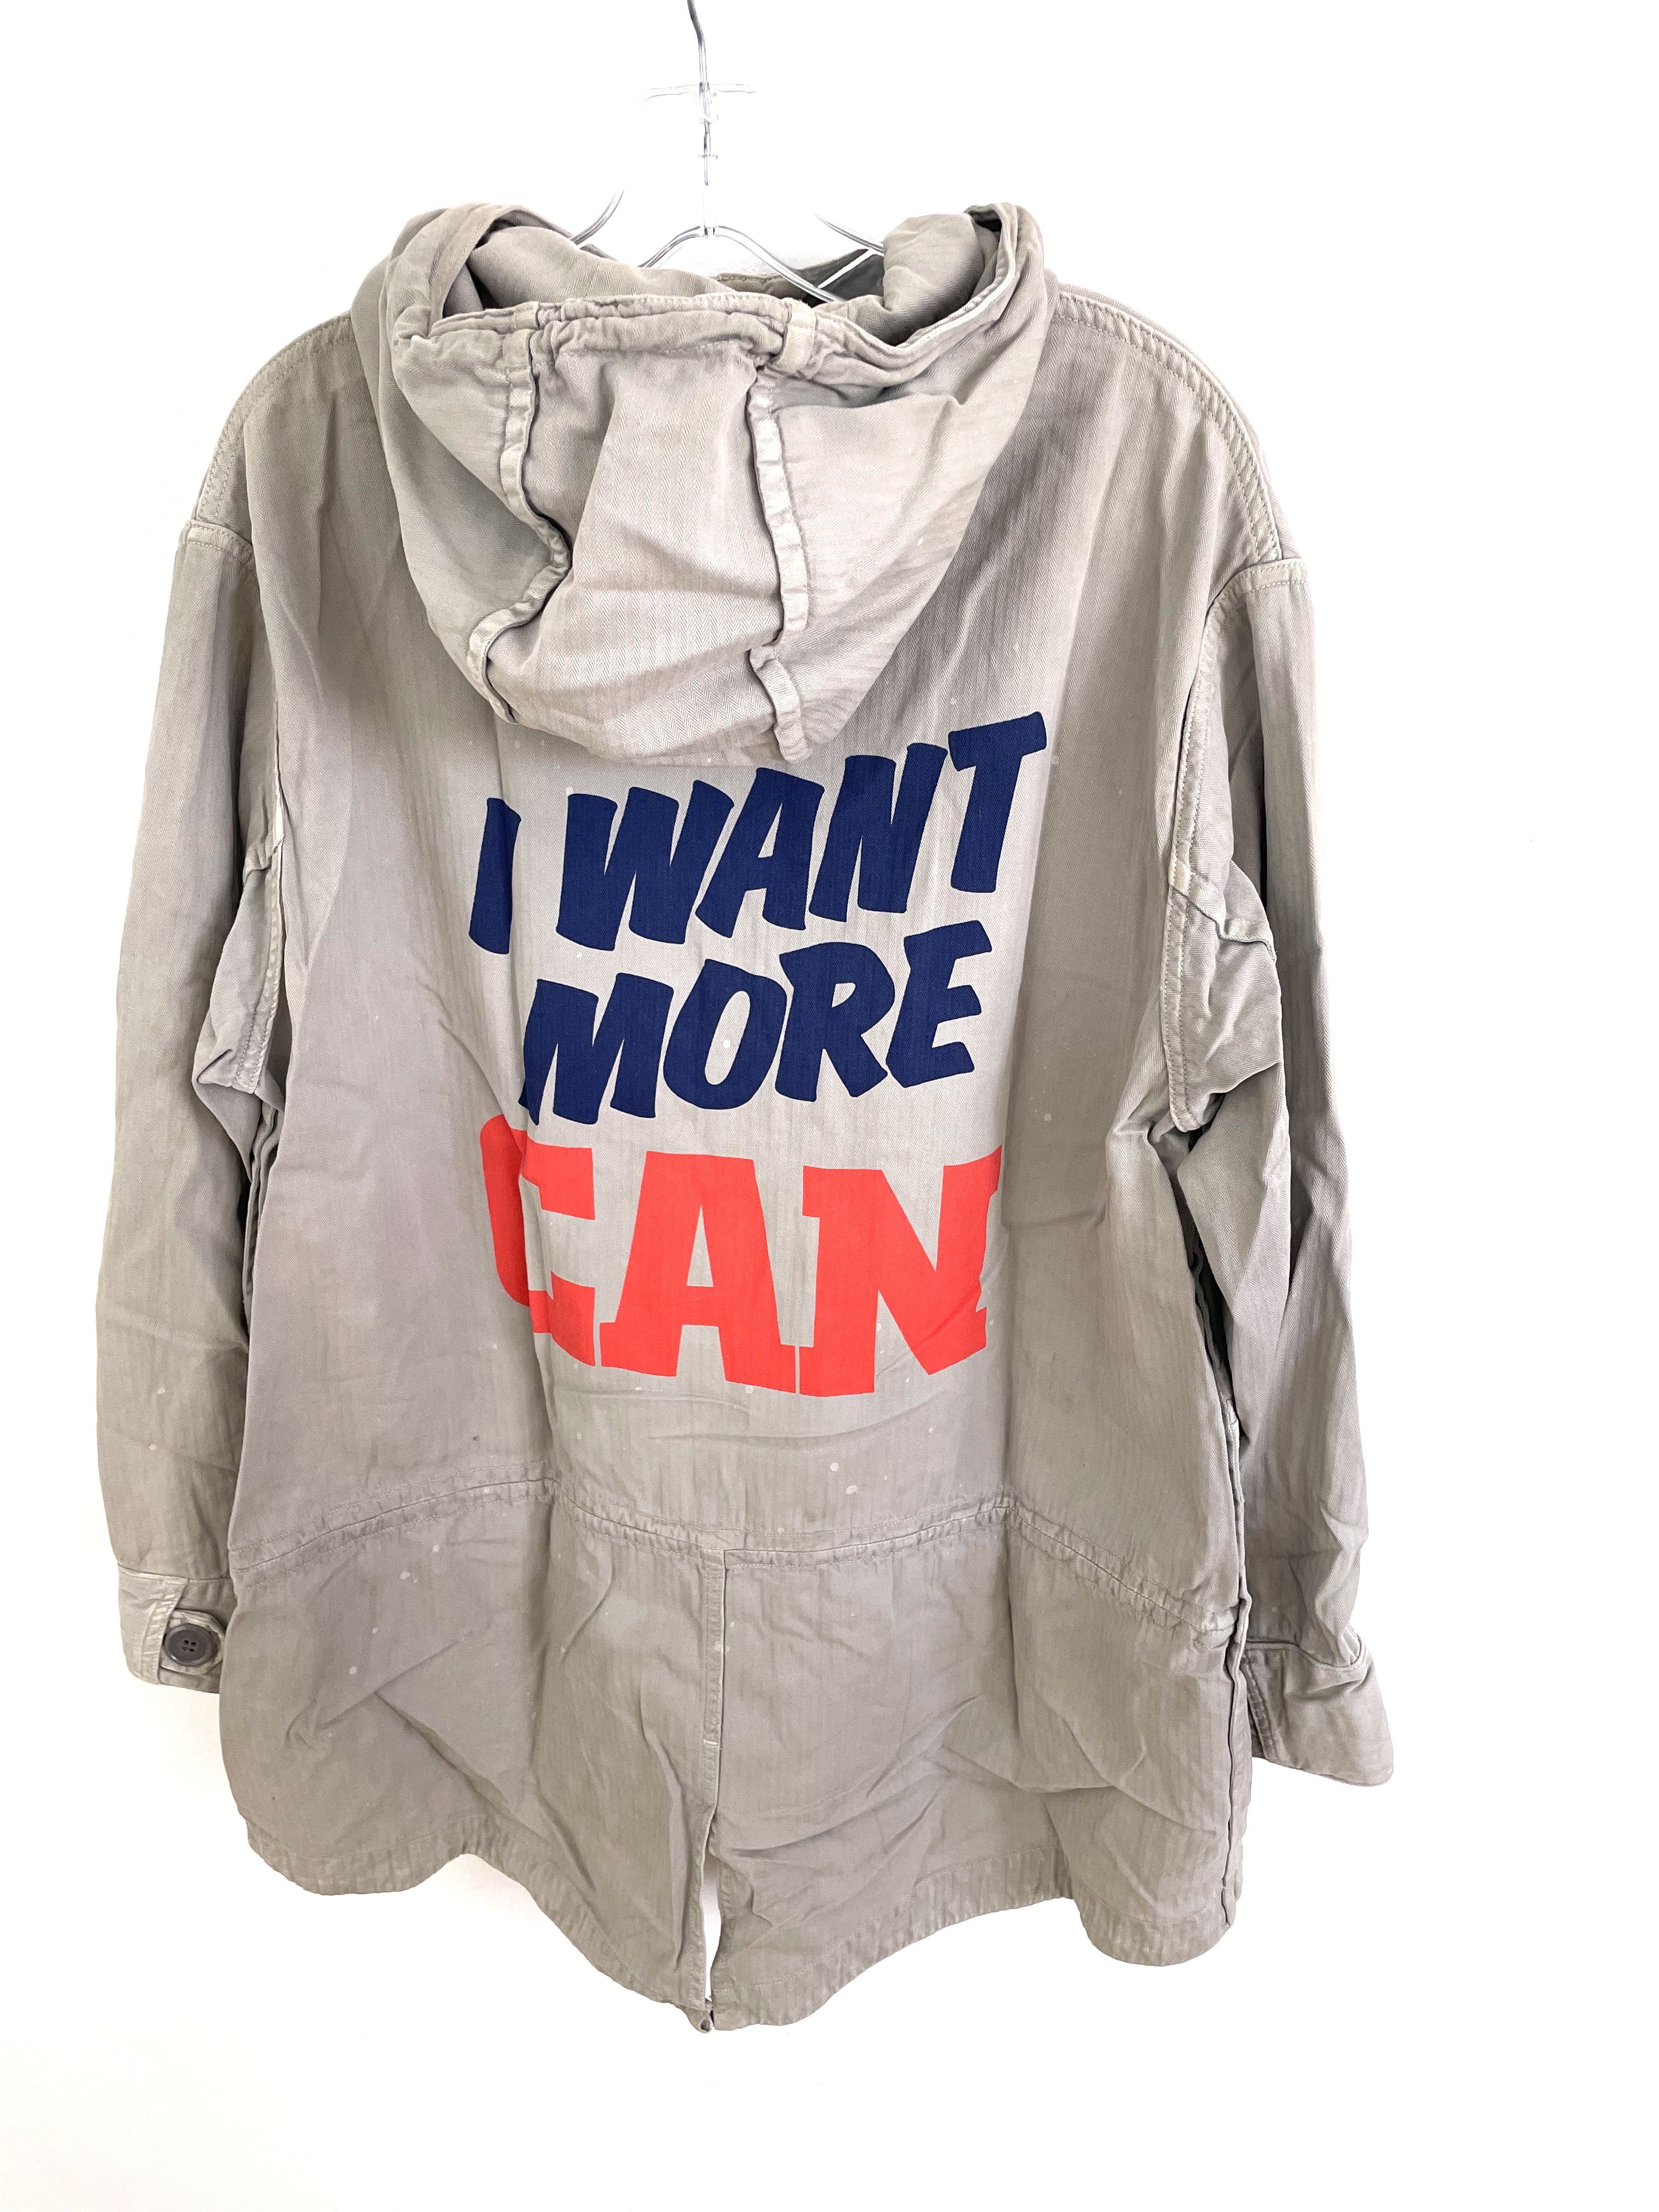 SS11 Underman I Want More Can Parka - 2